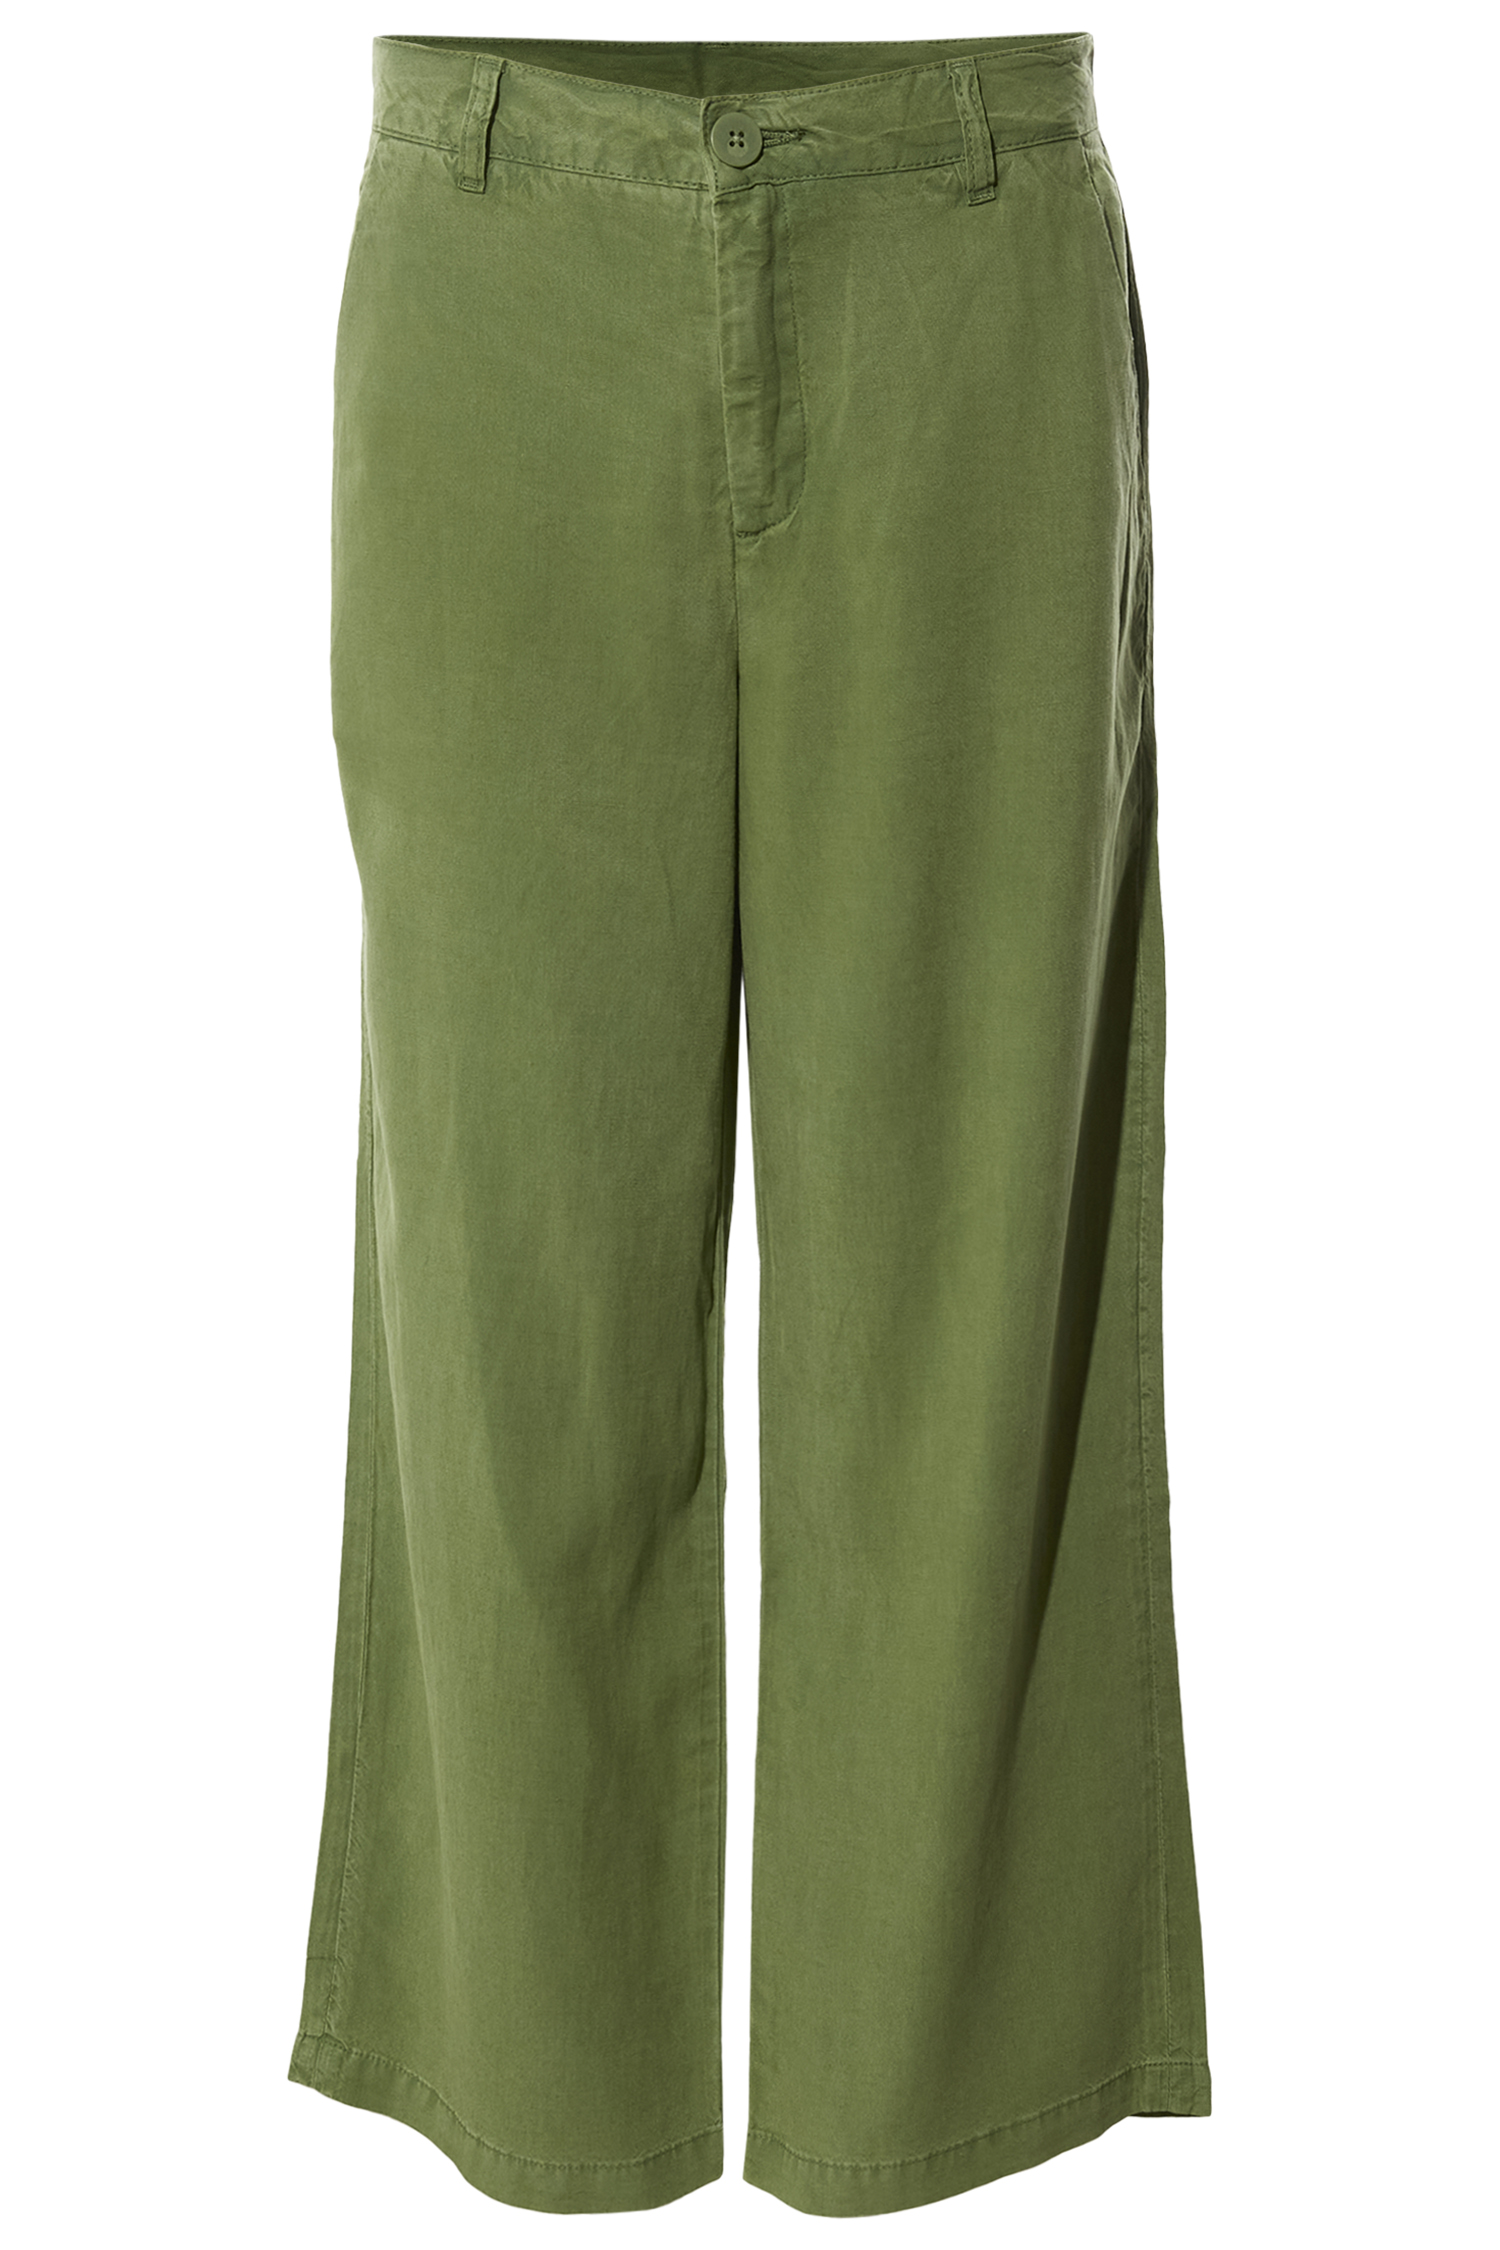 KUT from the Kloth Crop Wide Leg Trousers